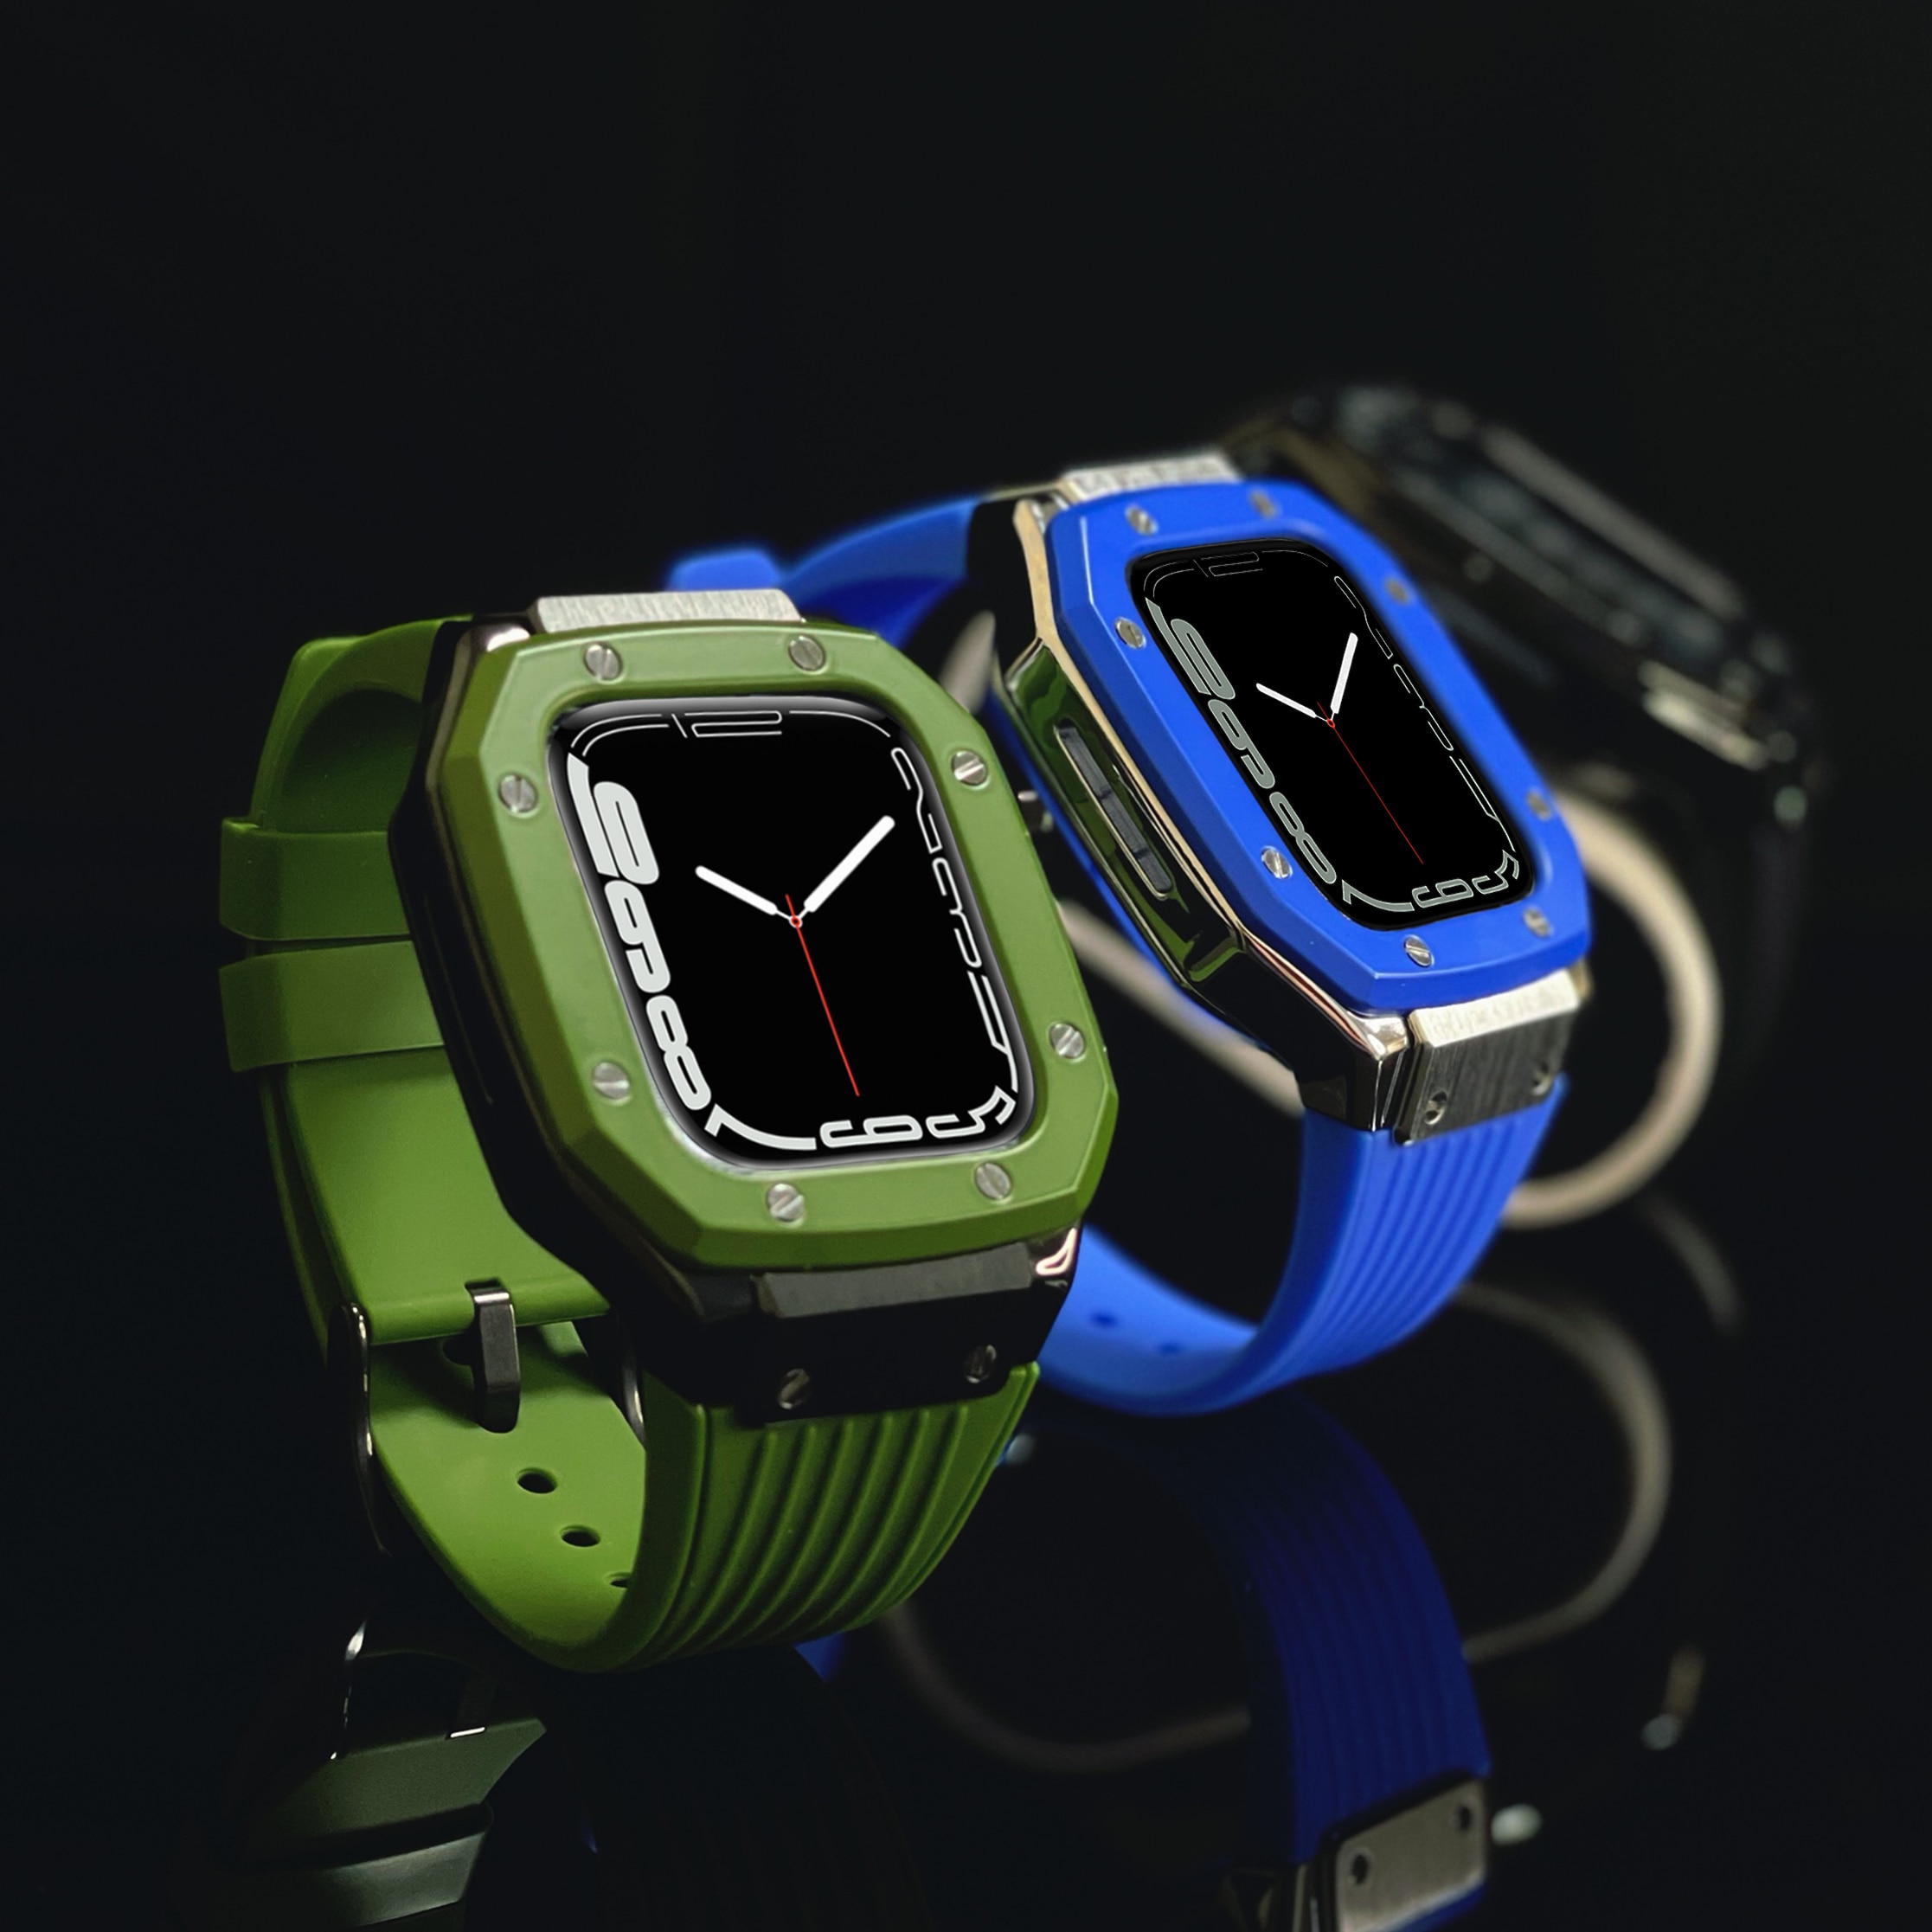 The Watch Case is made of zinc alloy. It features a classic design. Truly a watchmaking icon. Finished with a hand polish, the Watch Case is highly corrosion-resistant and robust for everyday use. The perpetual design is not only innovative and aesthetically pleasing, but convenient as well with a large face window for your Apple Watch. The Apple Watch Case is manufactured from Silicone block. The Metal chain bracelet band features a classic butterfly buckle that is expertly hand polished by a master craftsman. The case and strap are forged using different materials and design methods! The side features a seamless integration of an everlasting diamond crown to fully utilize your Apple Watch with style and grace. The back of the Watch Case is exposed for easy charging and full Apple Watch functionality. Compatible with Apple Watch 45mm/44mm Series 7/Series 6/Series 5/Series 4/. Fits wrist sizes 5.9″ to 9.25″ (15cm to 23.5cm). Easy access to all Apple Watch features with precise buttons and crown cutouts. There is no need to remove the bumper when charging. Shock-resistant design, daily scratch-resistant, soft shock-absorbing layer, protect iwatch from impact and drop. A raised edge guard protects the face of the dial, which is drop-tested from 9 feet.